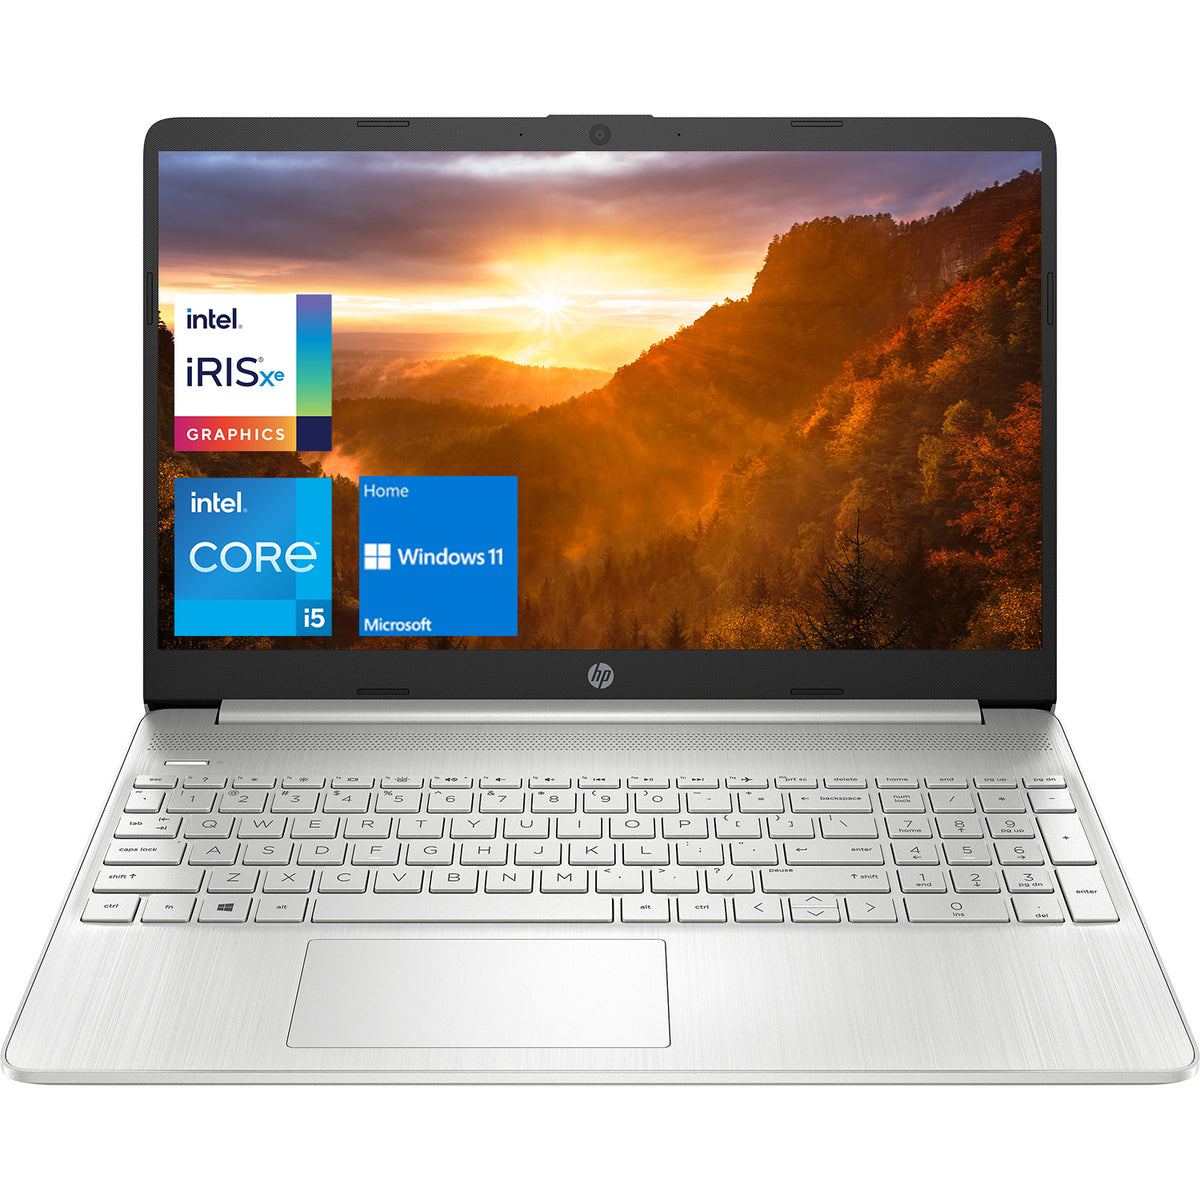 HP 15 Notebook Laptop, 15.6" FHD Non-touch Screen, Intel Core i5-1135G7, 8GB RAM, 256GB PCIe SSD, No FP, No BK, Windows 11 Home, Natural Silver